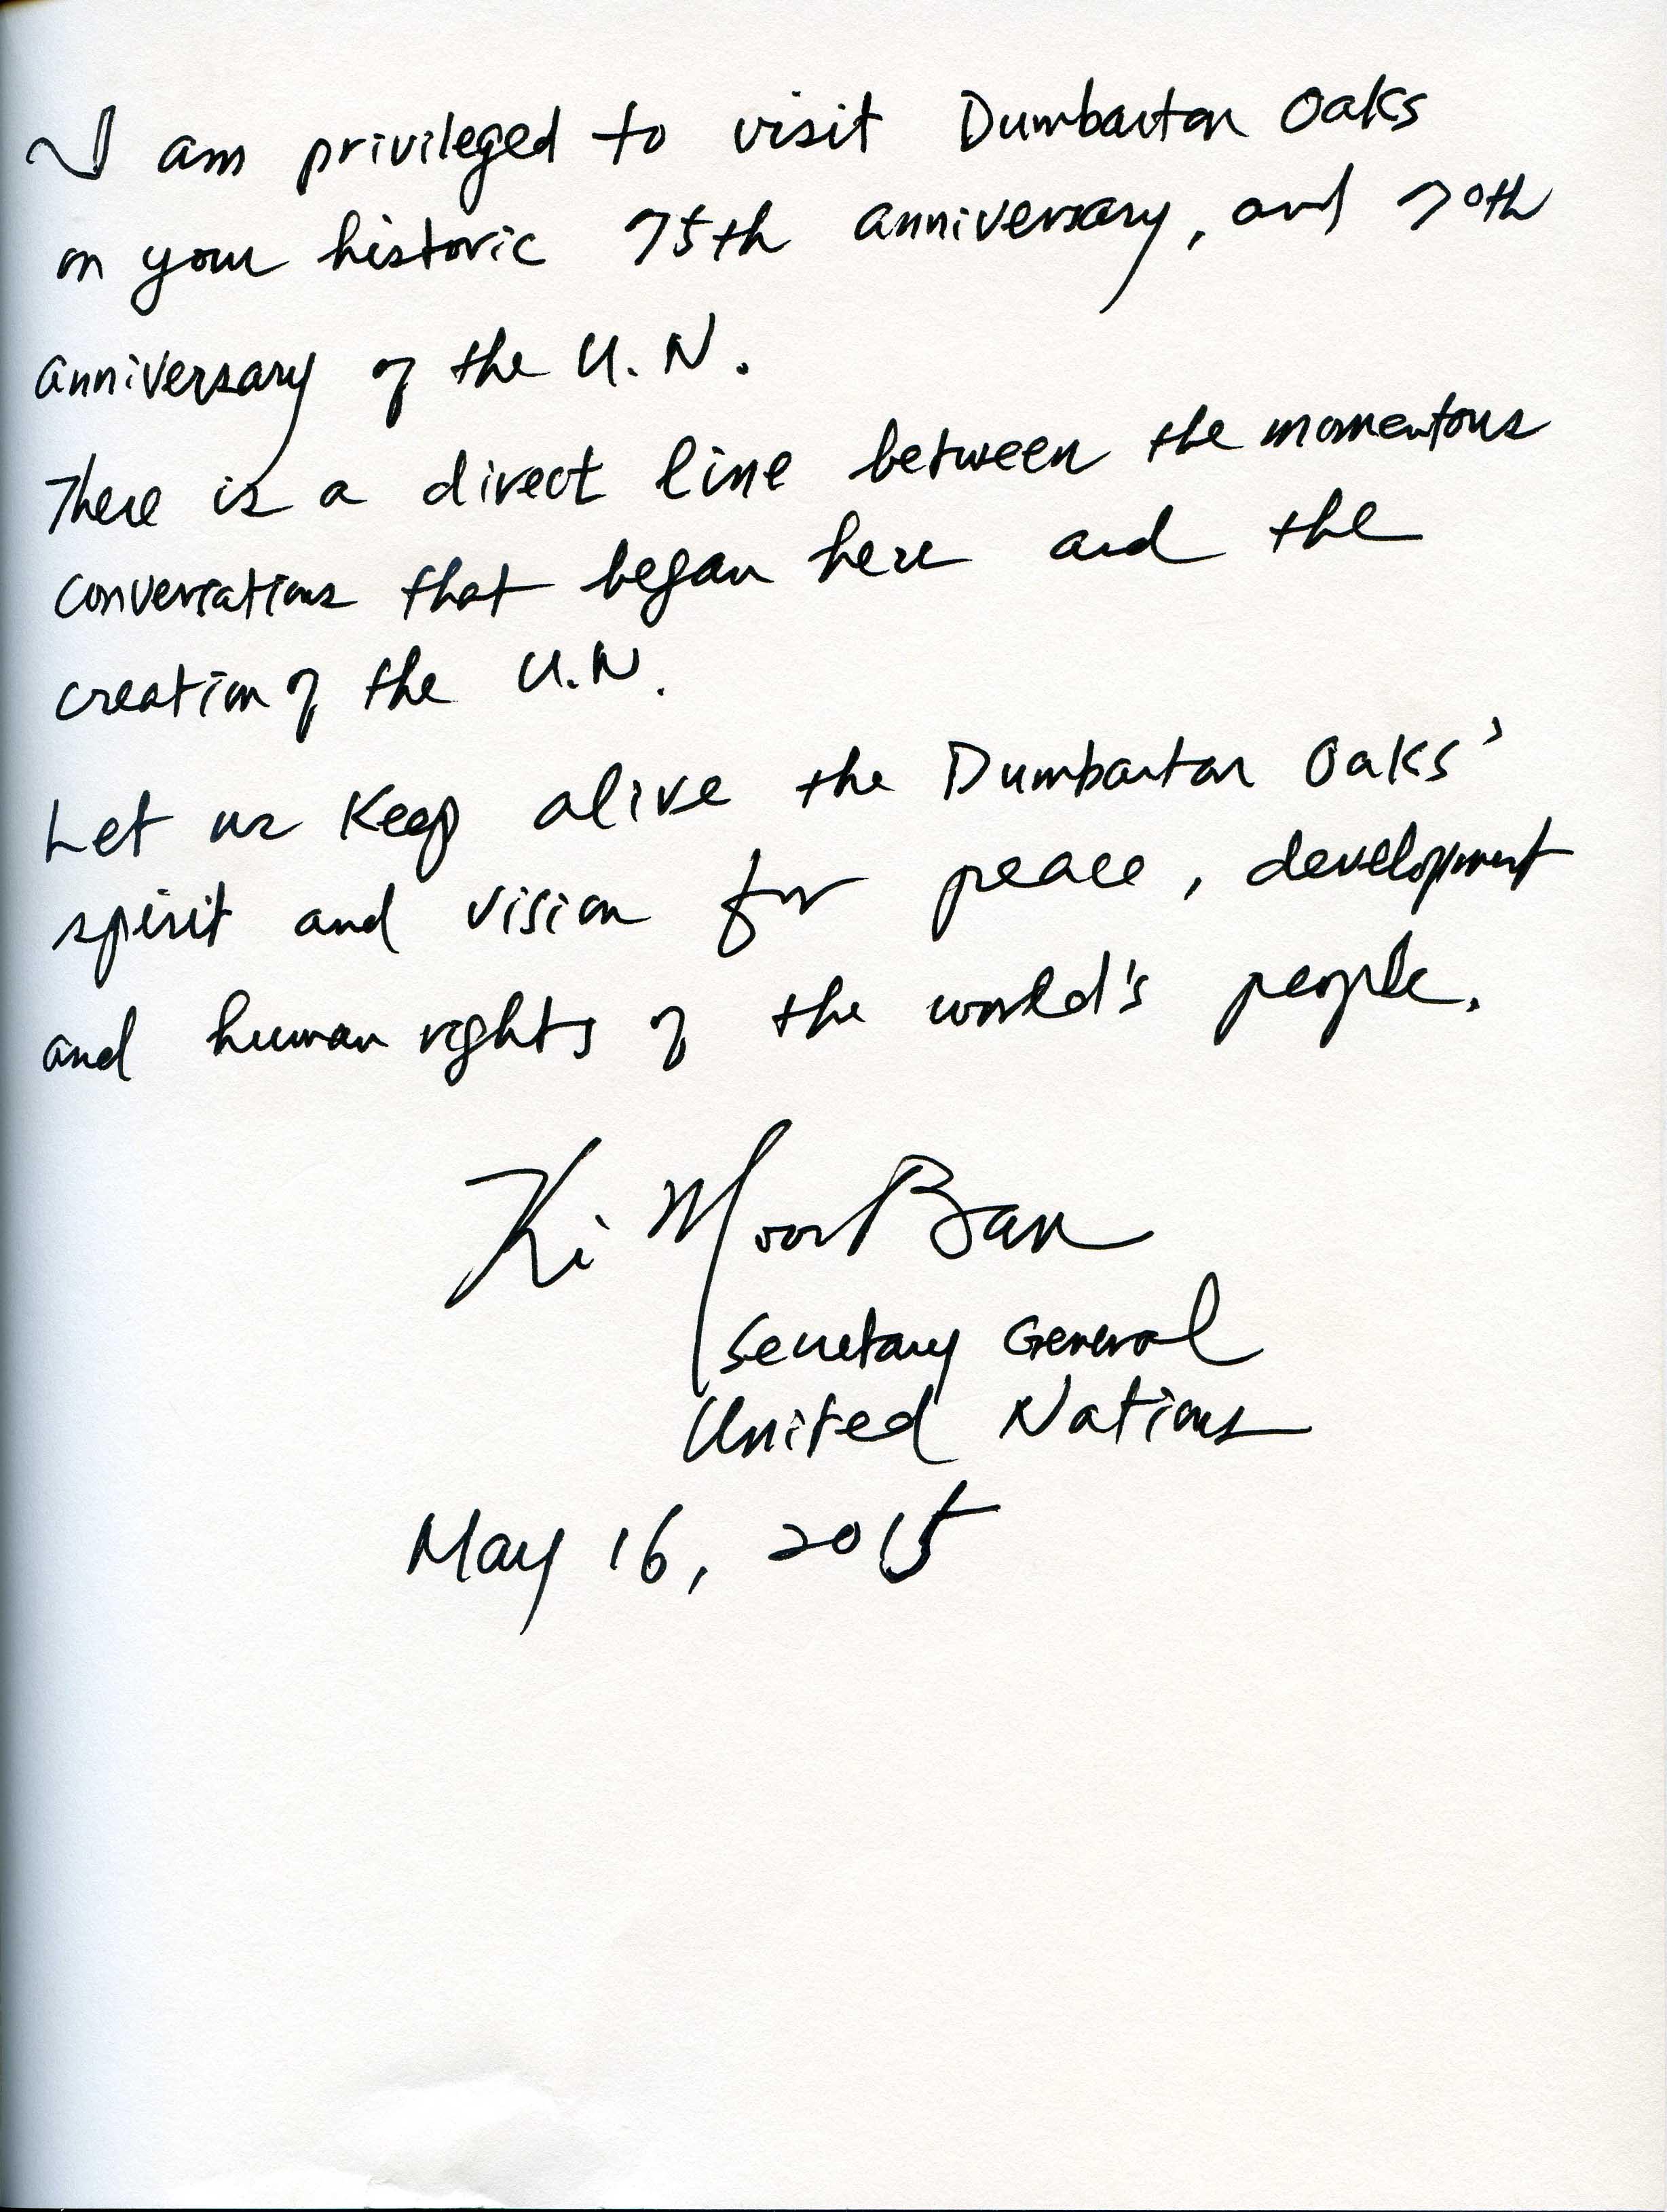 Guest Book Page Signed by United Nations Secretary General Ban Ki-Moon (AR.OB.Misc.067)